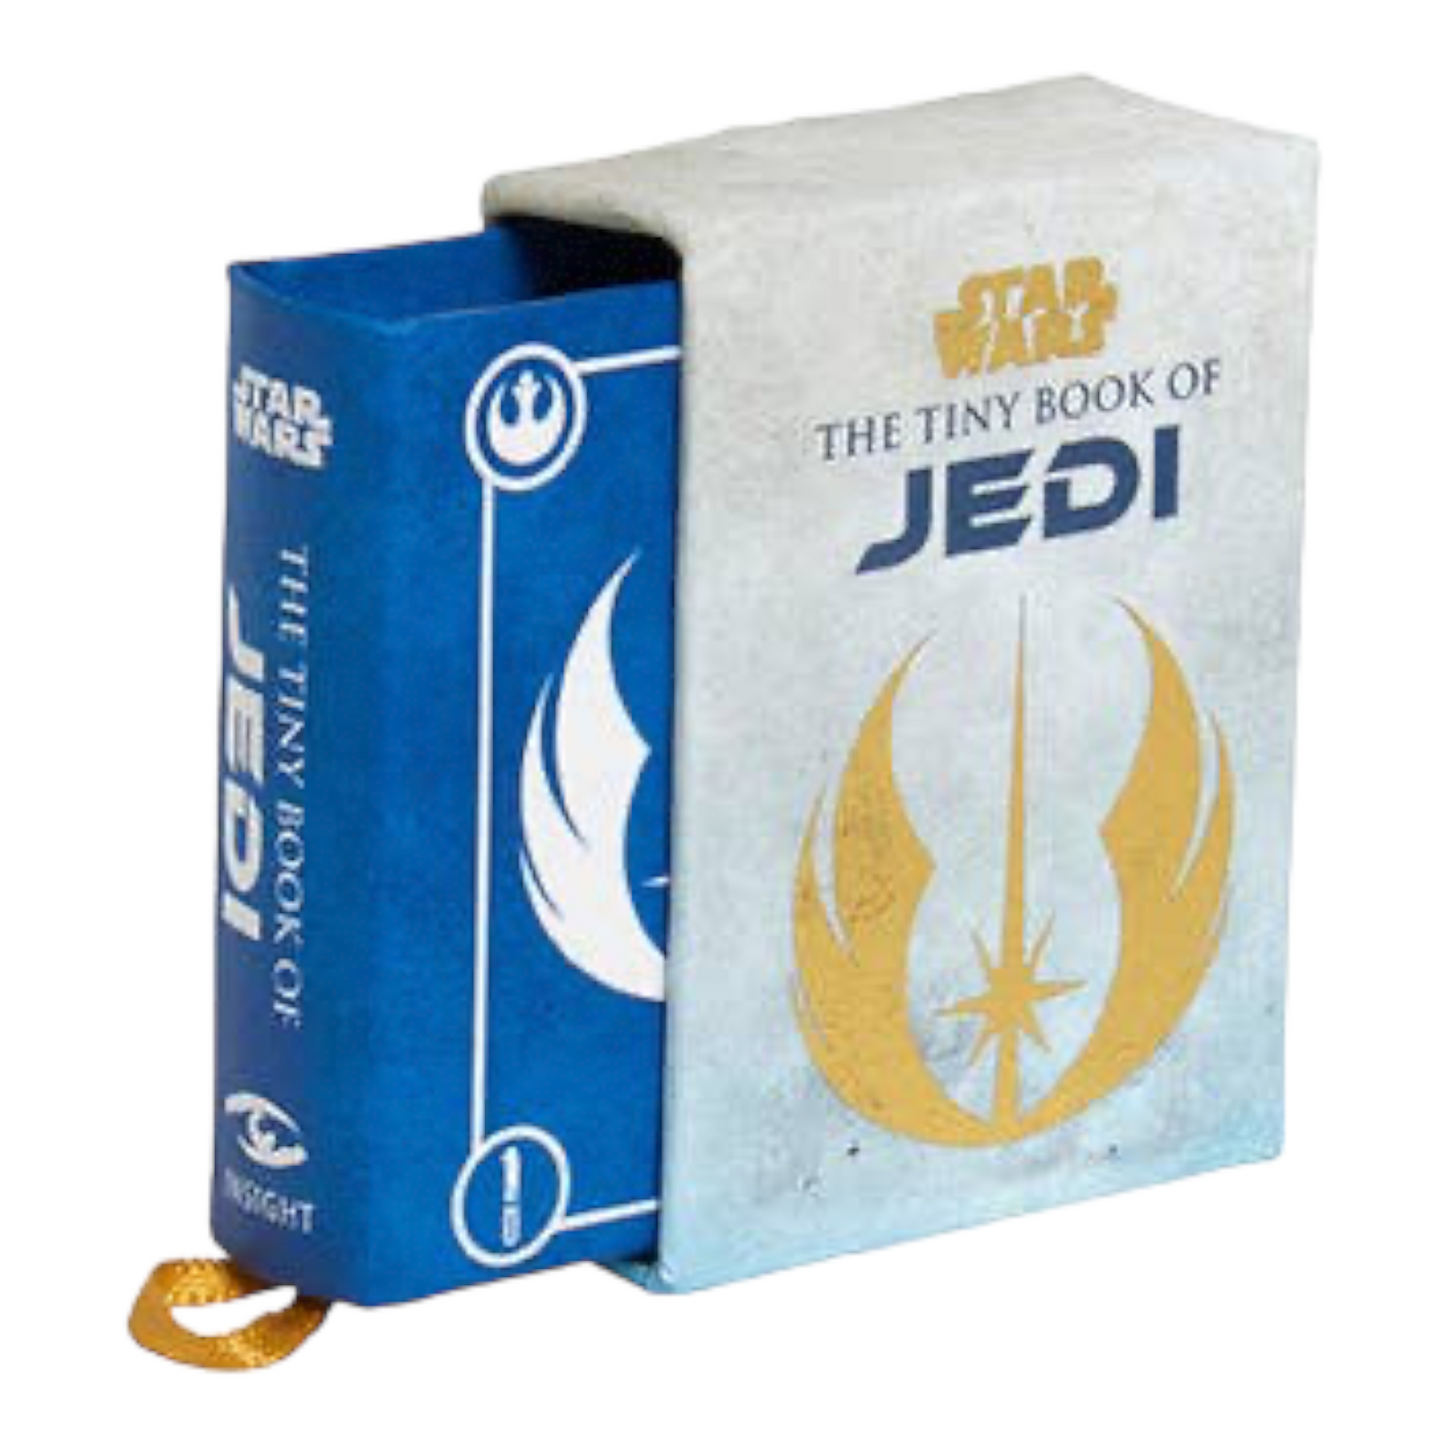 Star Wars: The Tiny Book of Jedi - Wisdom from the Light Side of the Force